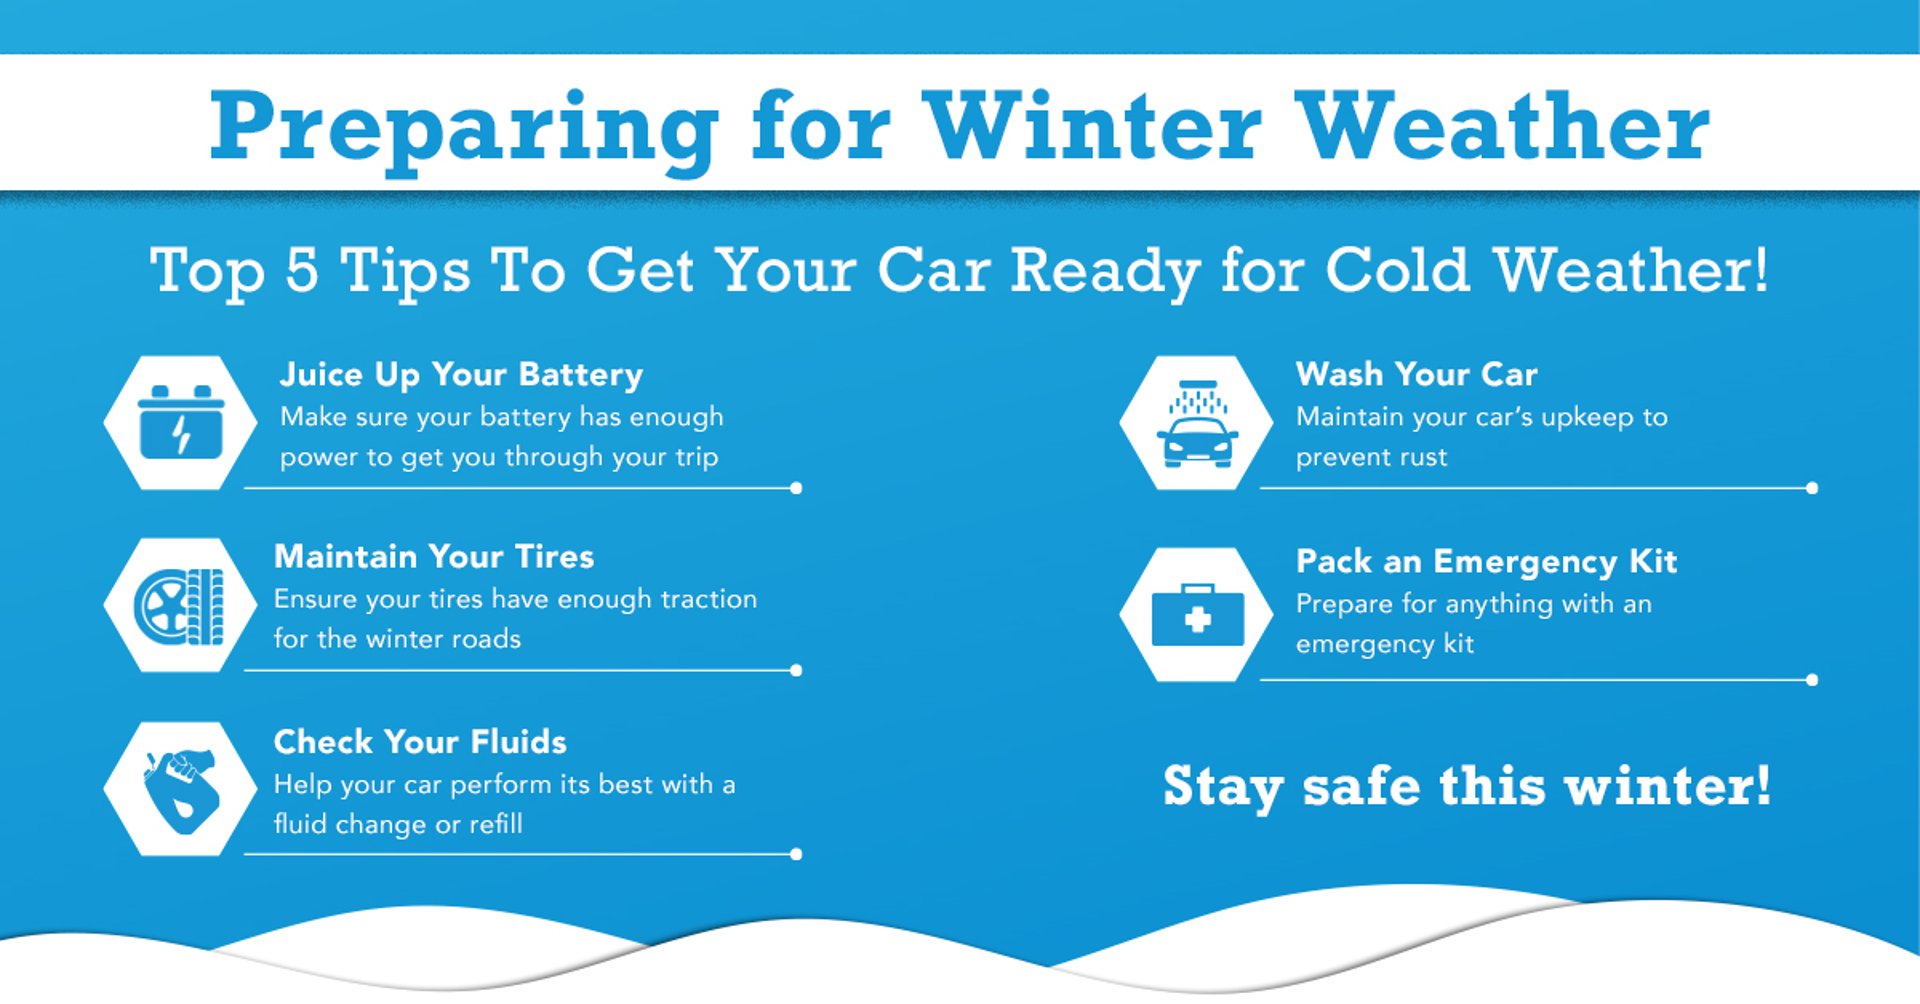 11 Winter Car Accessories You Need (Or Didn't Know You Needed Until Now) -  TrueCar Blog